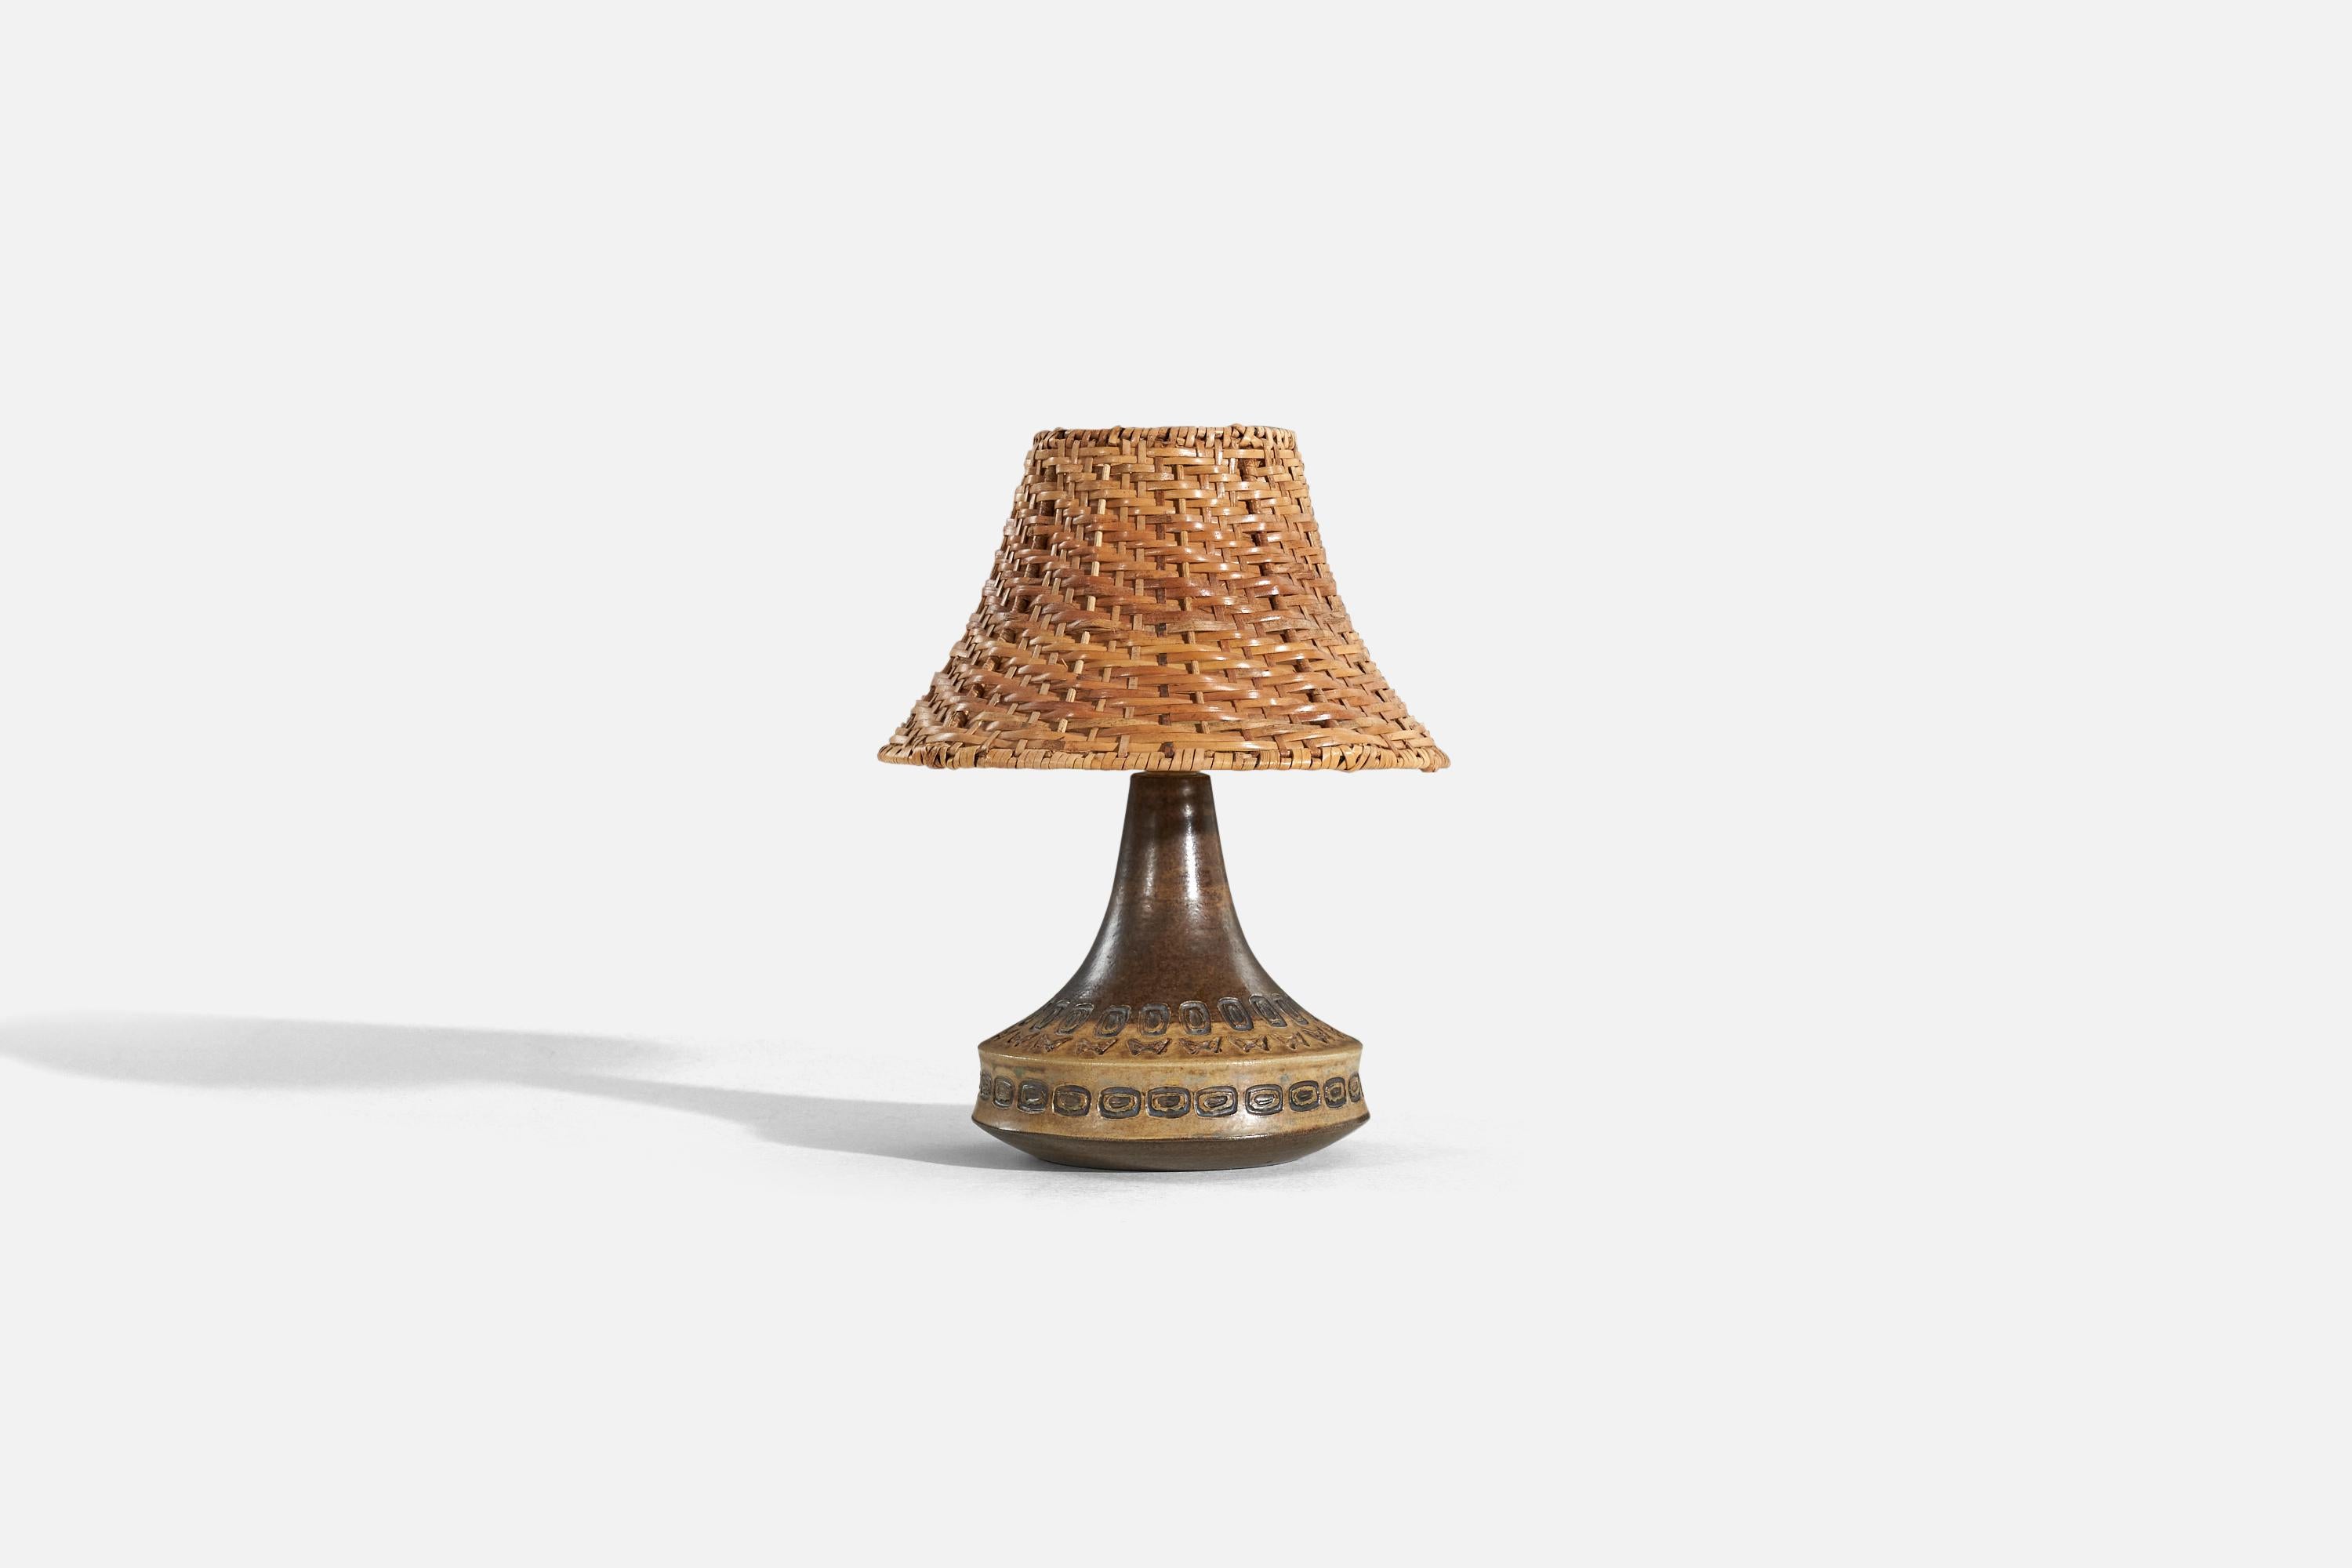 A brown, glazed and incised stoneware table lamp designed by Ulla Winbladh and produced by Alingsås Keramik, Sweden, c. 1950s.

Sold without lampshade. 
Dimensions of Lamp (inches) : 8 x 6.25 x 6.25 (H x W x D)
Dimensions of Shade (inches) : 4 x